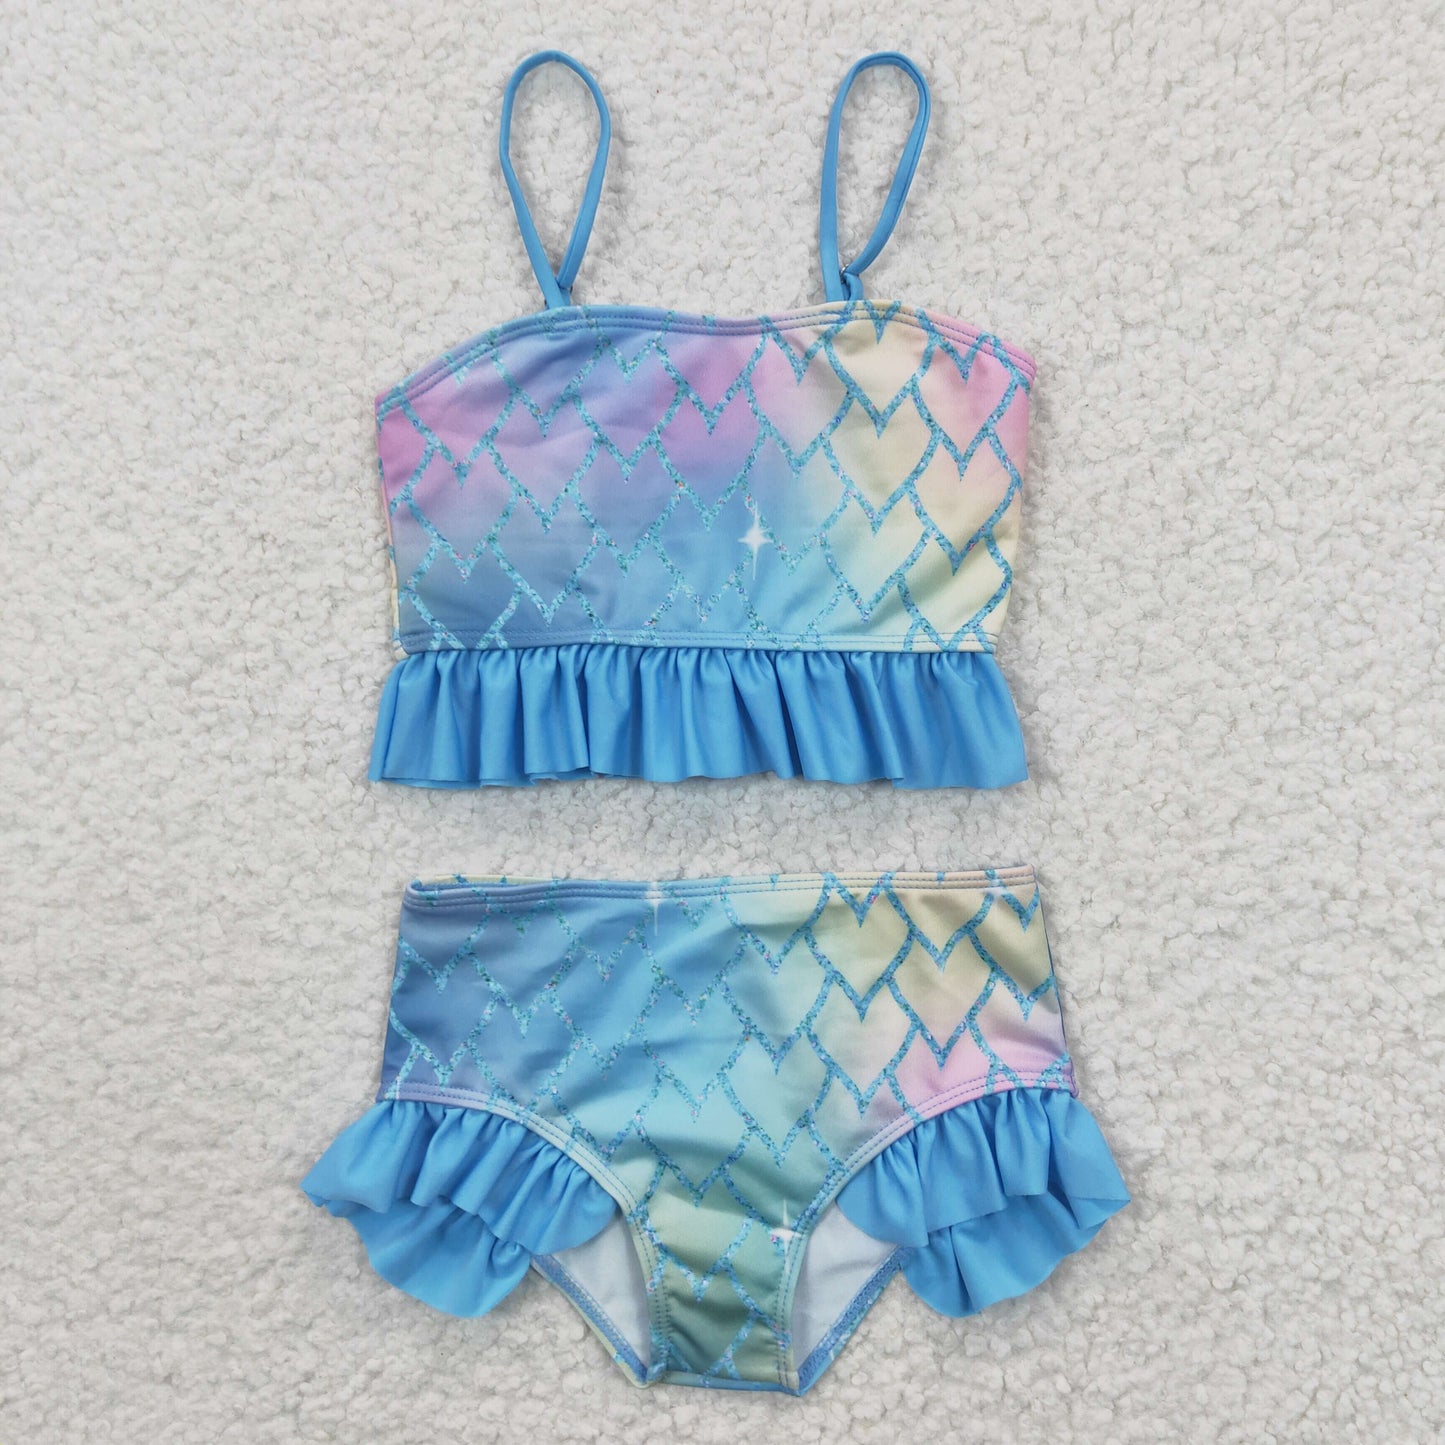 S0061 Girls Scale Print Swimsuit